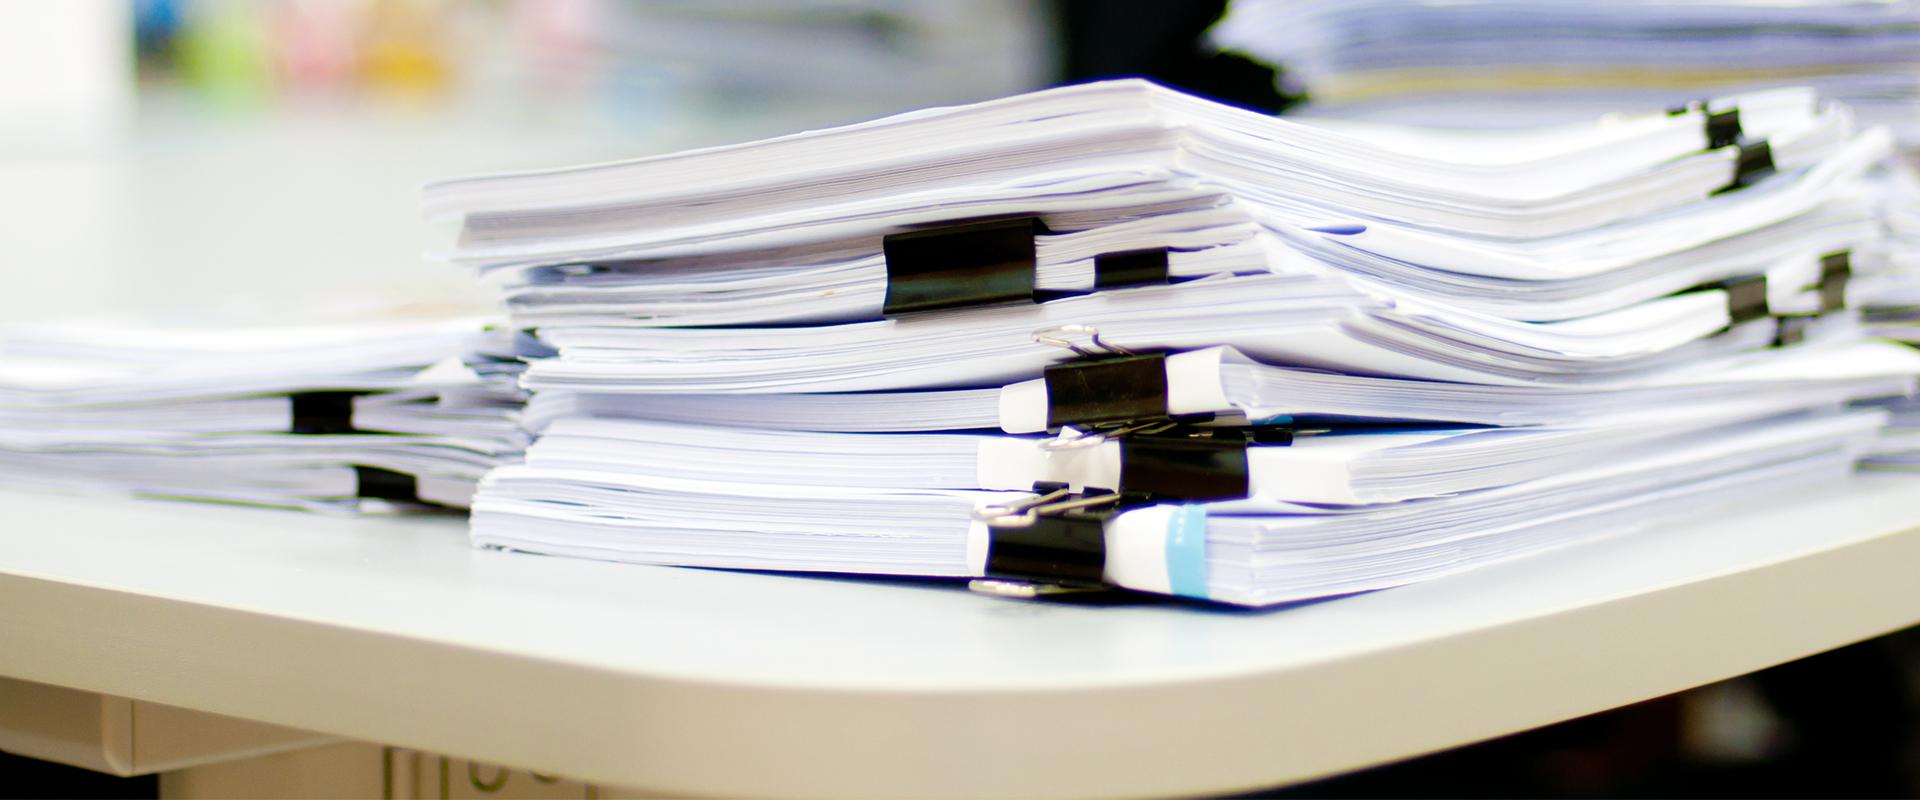 files of resources stacked on a desk